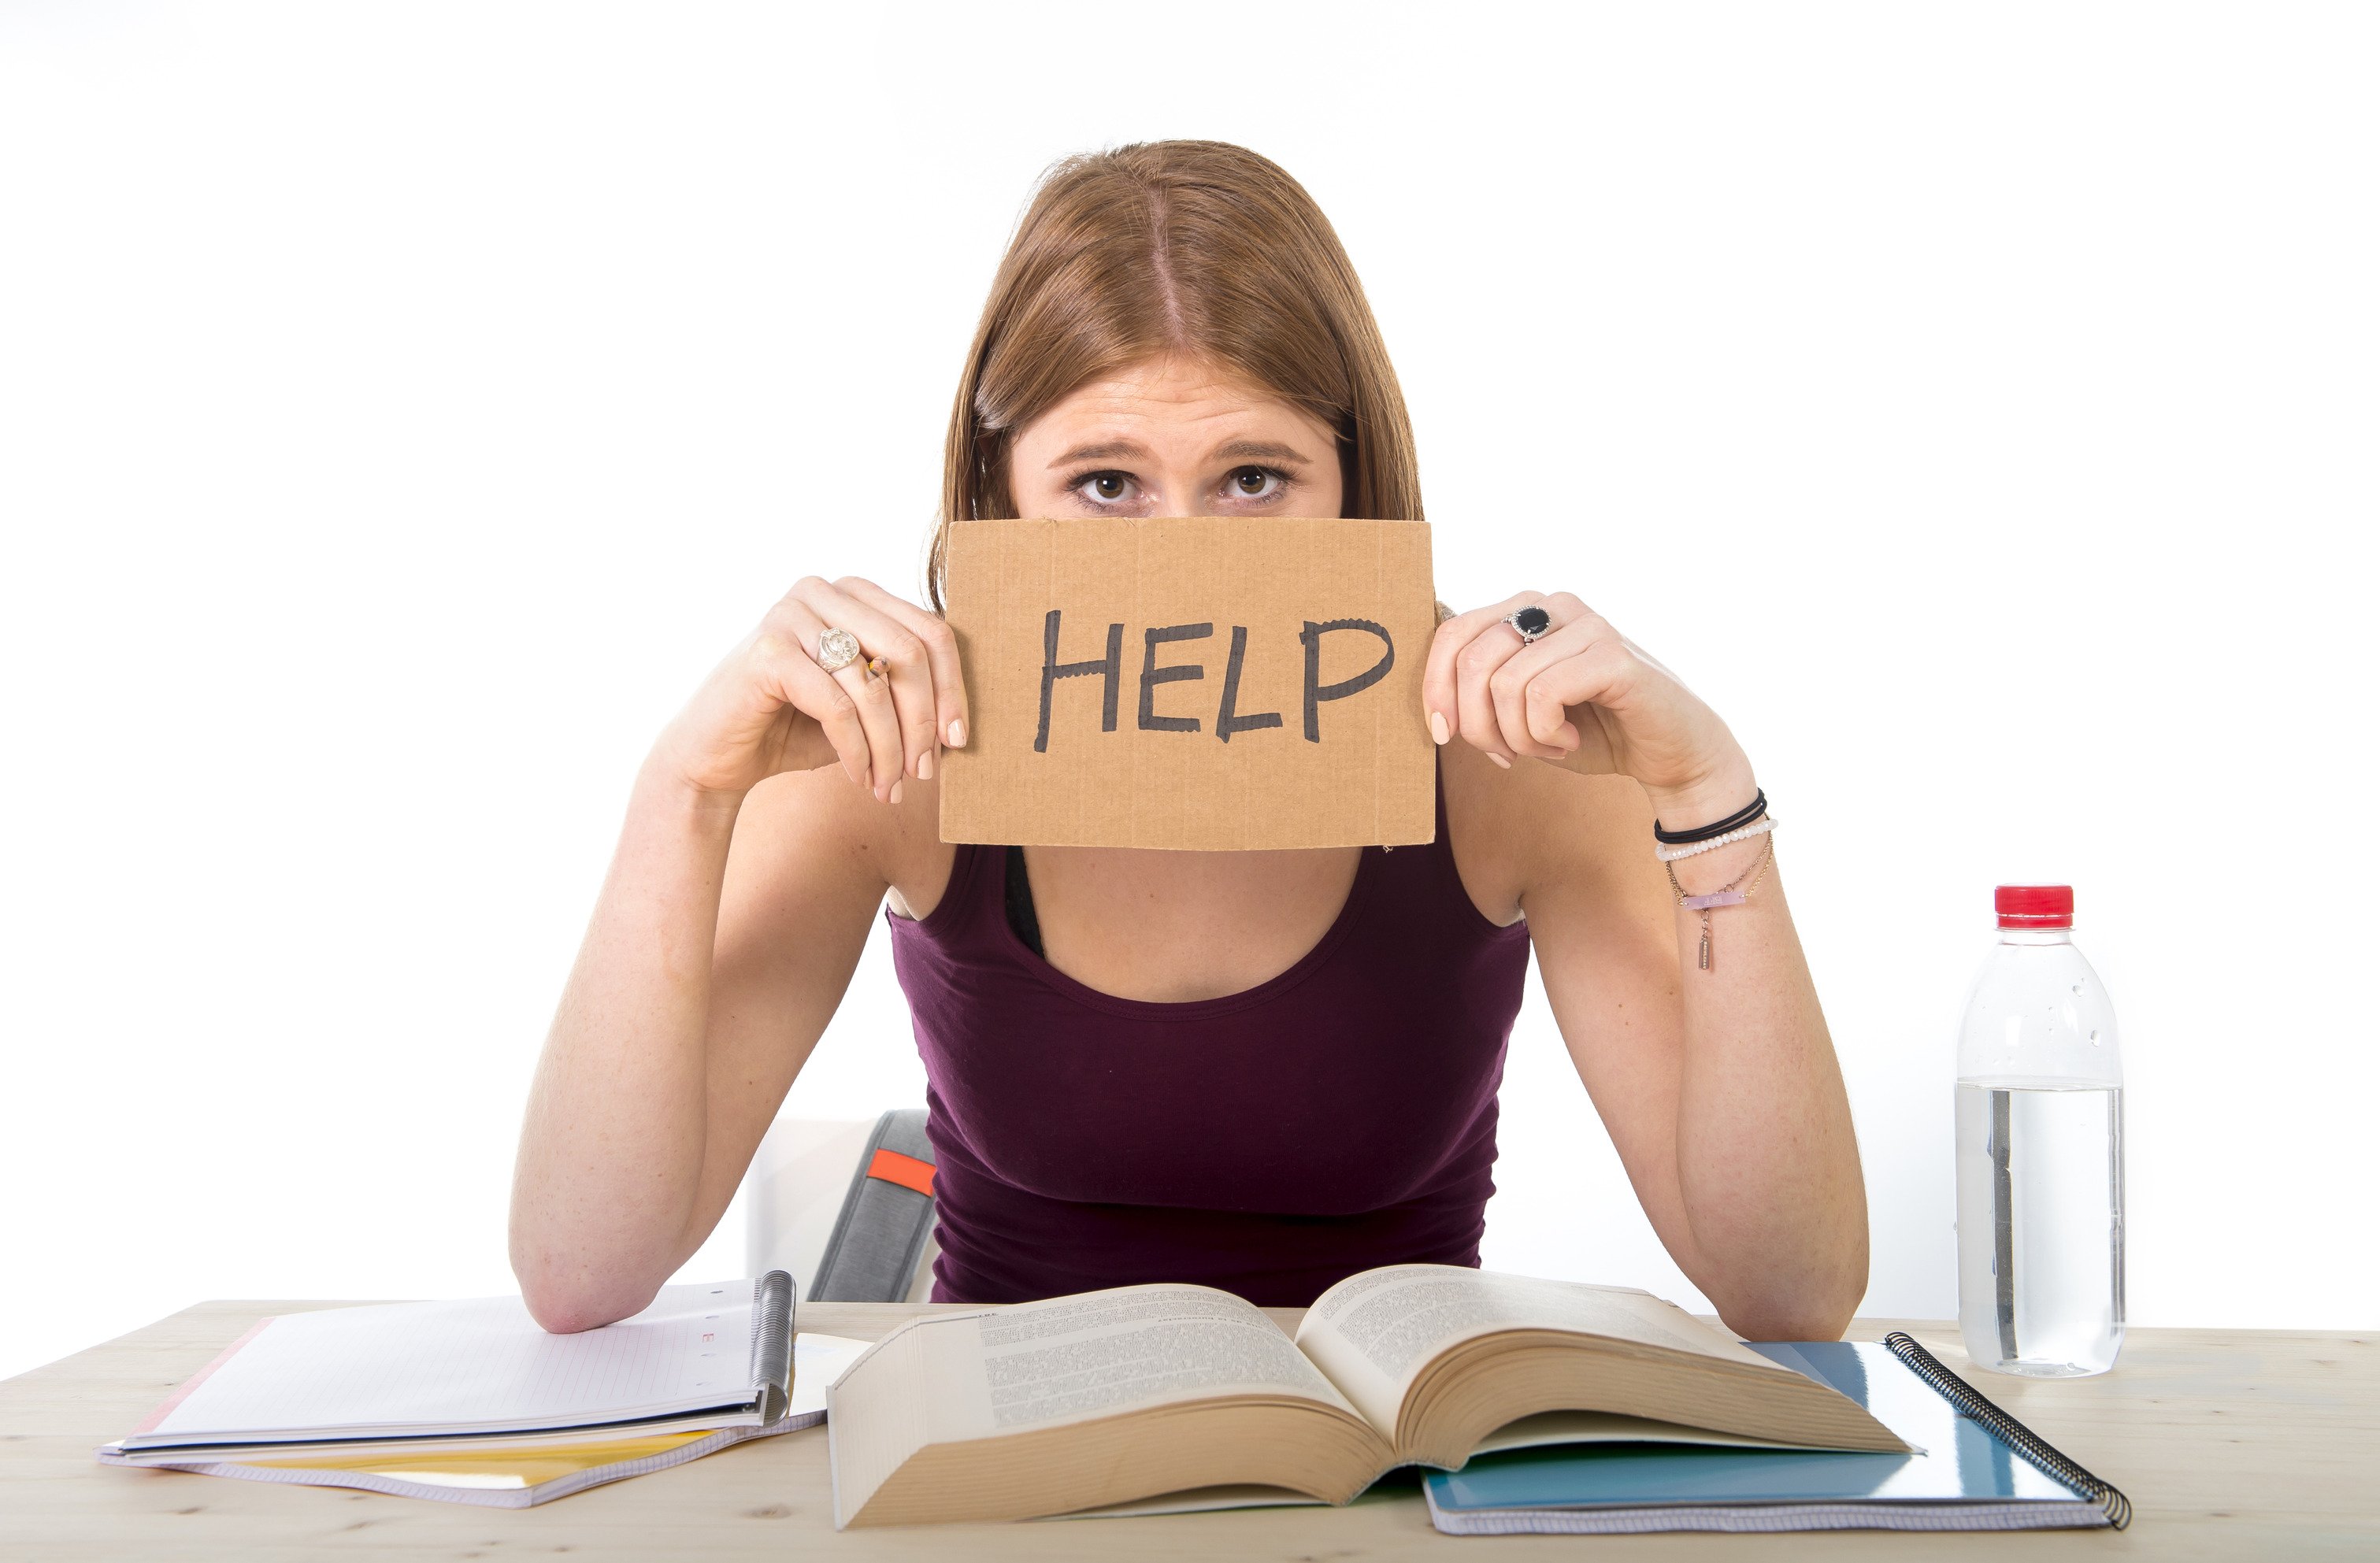 photodune-10639507-college-student-girl-studying-for-university-exam-worried-in-stress-asking-for-help-l.jpg